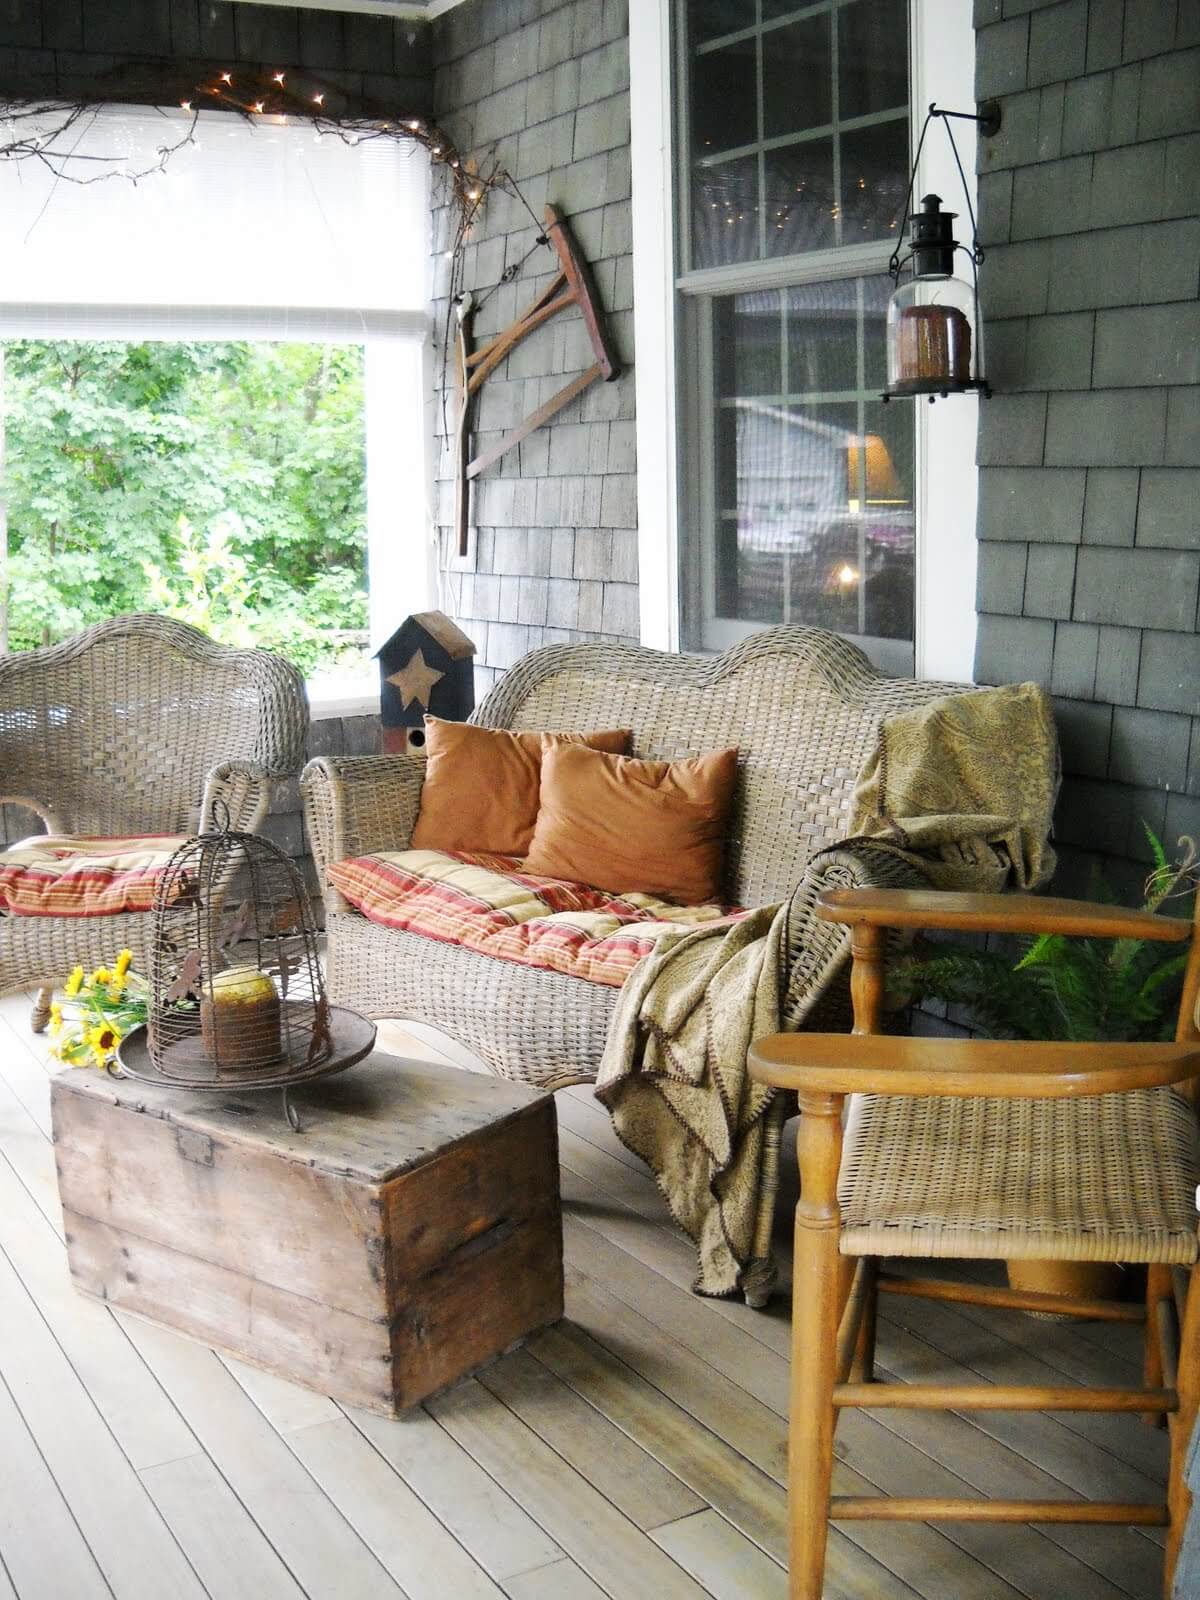 Mountain Cabin Woven Porch Furnishings With Antique Crate Table